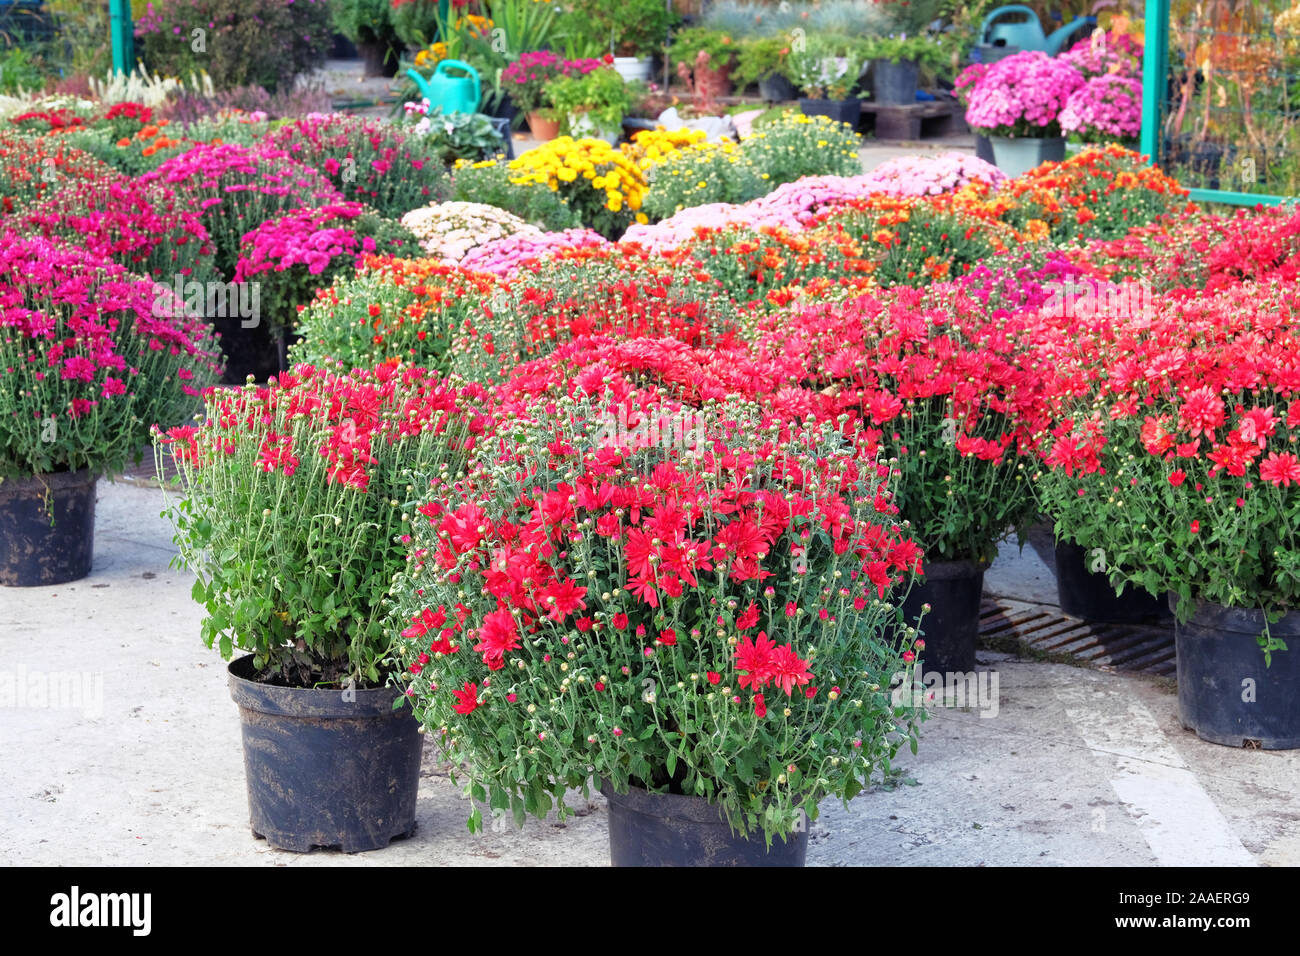 Garden shop with flowers. Bushes with purple and red hrysanthemums in pots in garden store. Nursery of plant and trees for gardening. Stock Photo